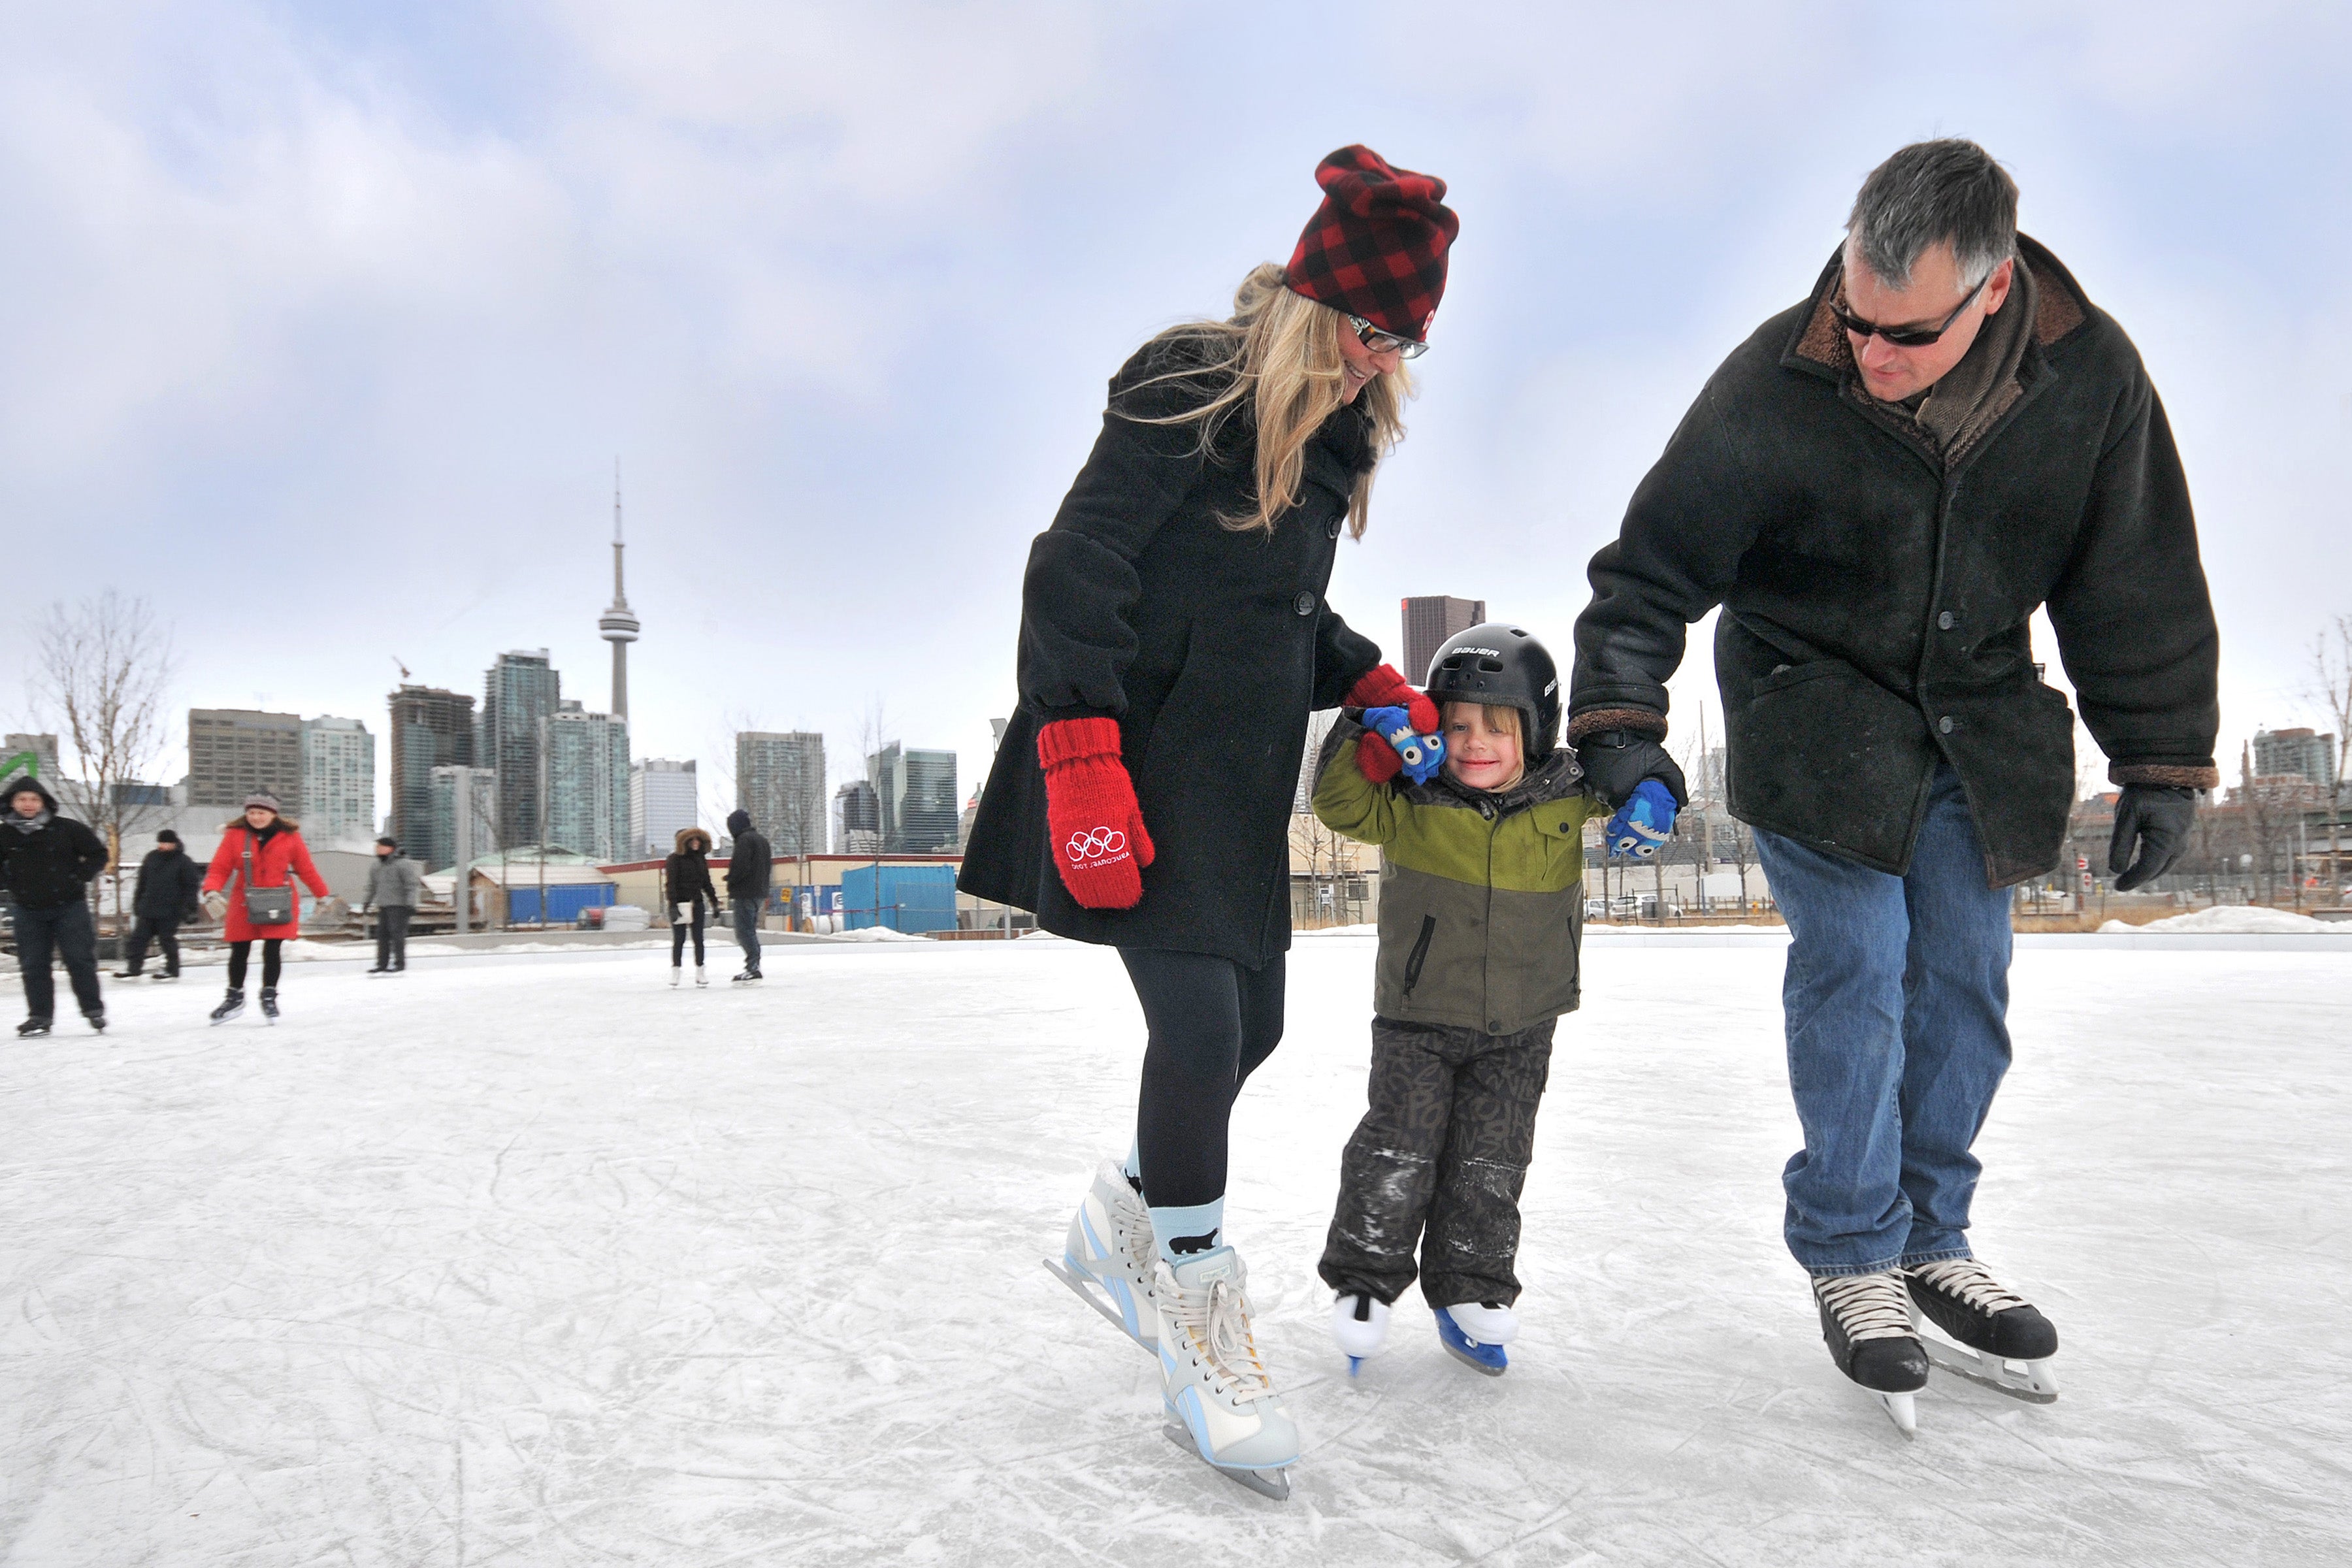 Families skating on the outdoor ice rink at Sherbourne Common.